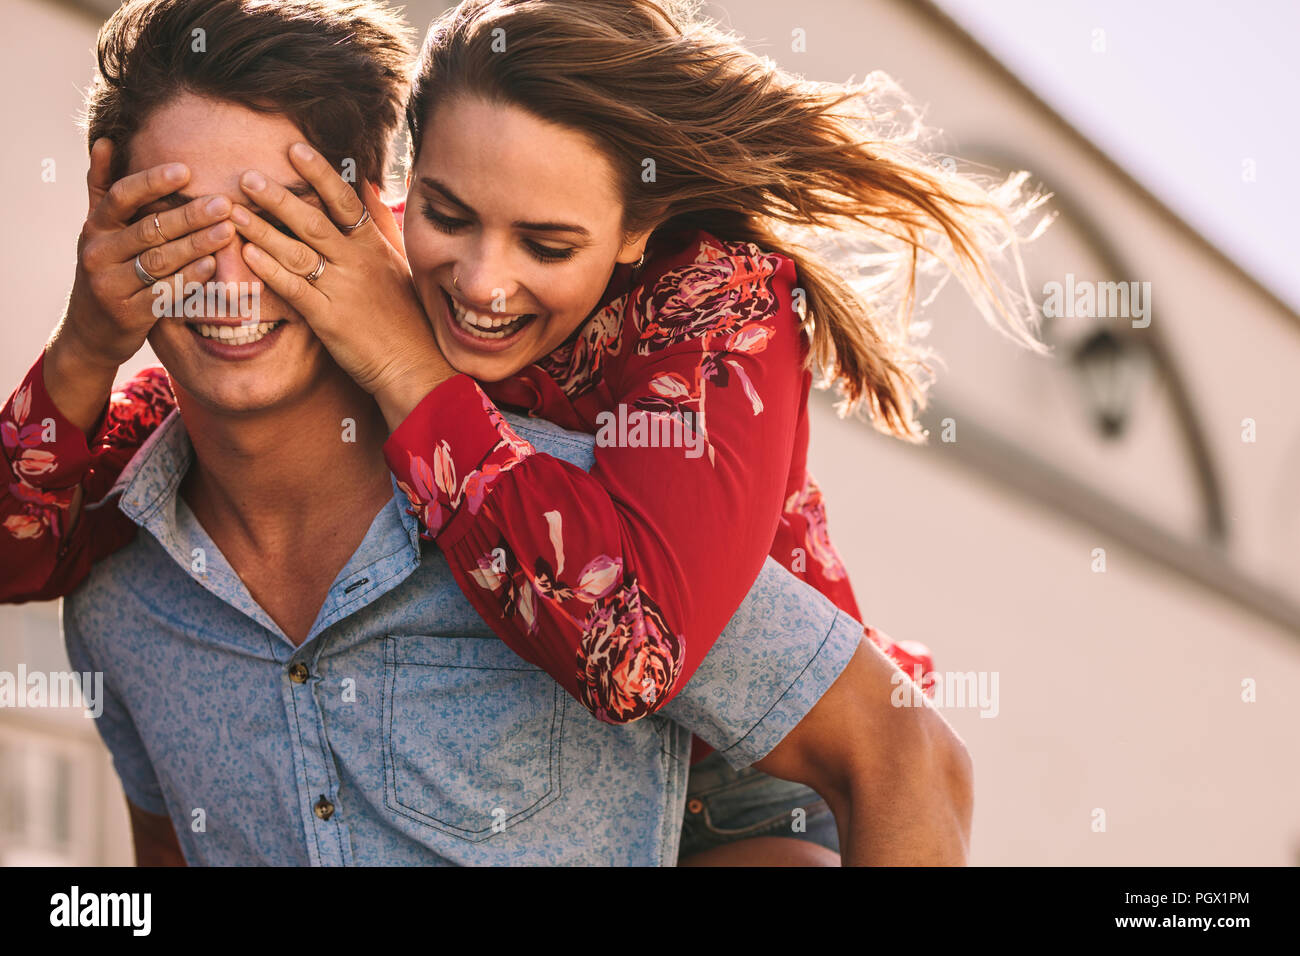 Smiling woman piggy riding on man closing his eyes with her hands. Smiling man carrying woman on his back walking outdoors. Stock Photo